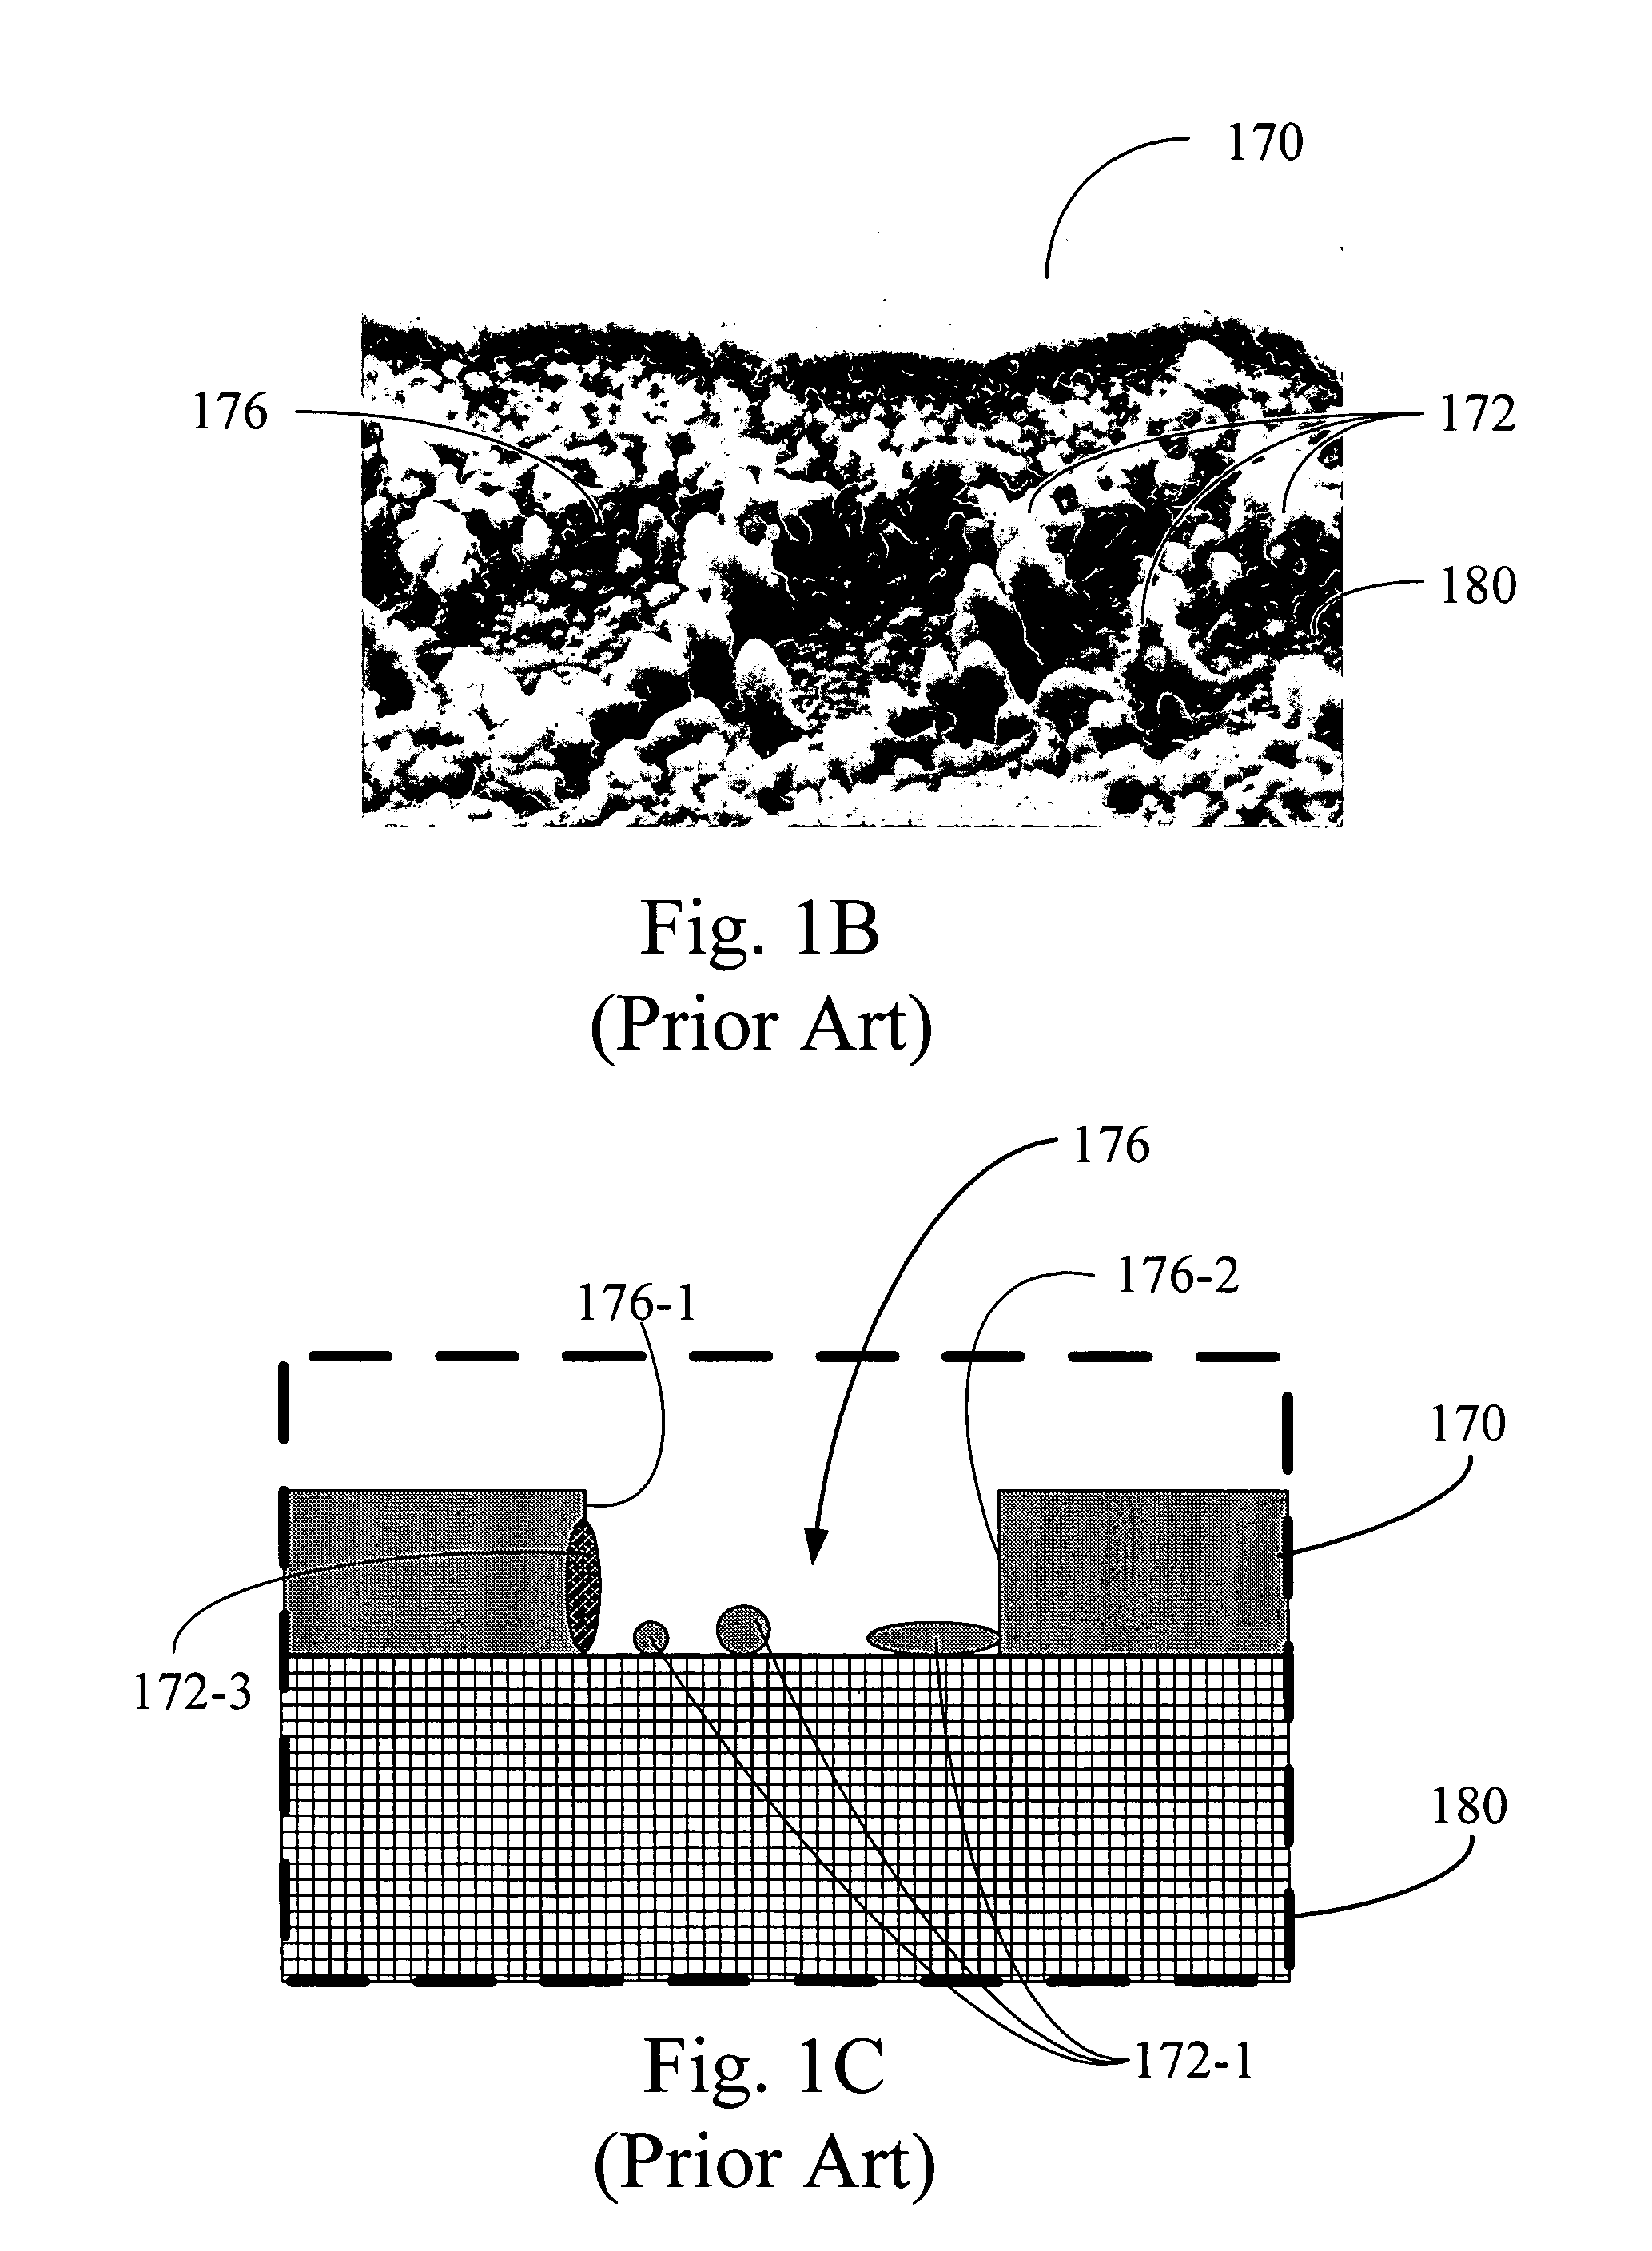 Laser scribing apparatus, systems, and methods